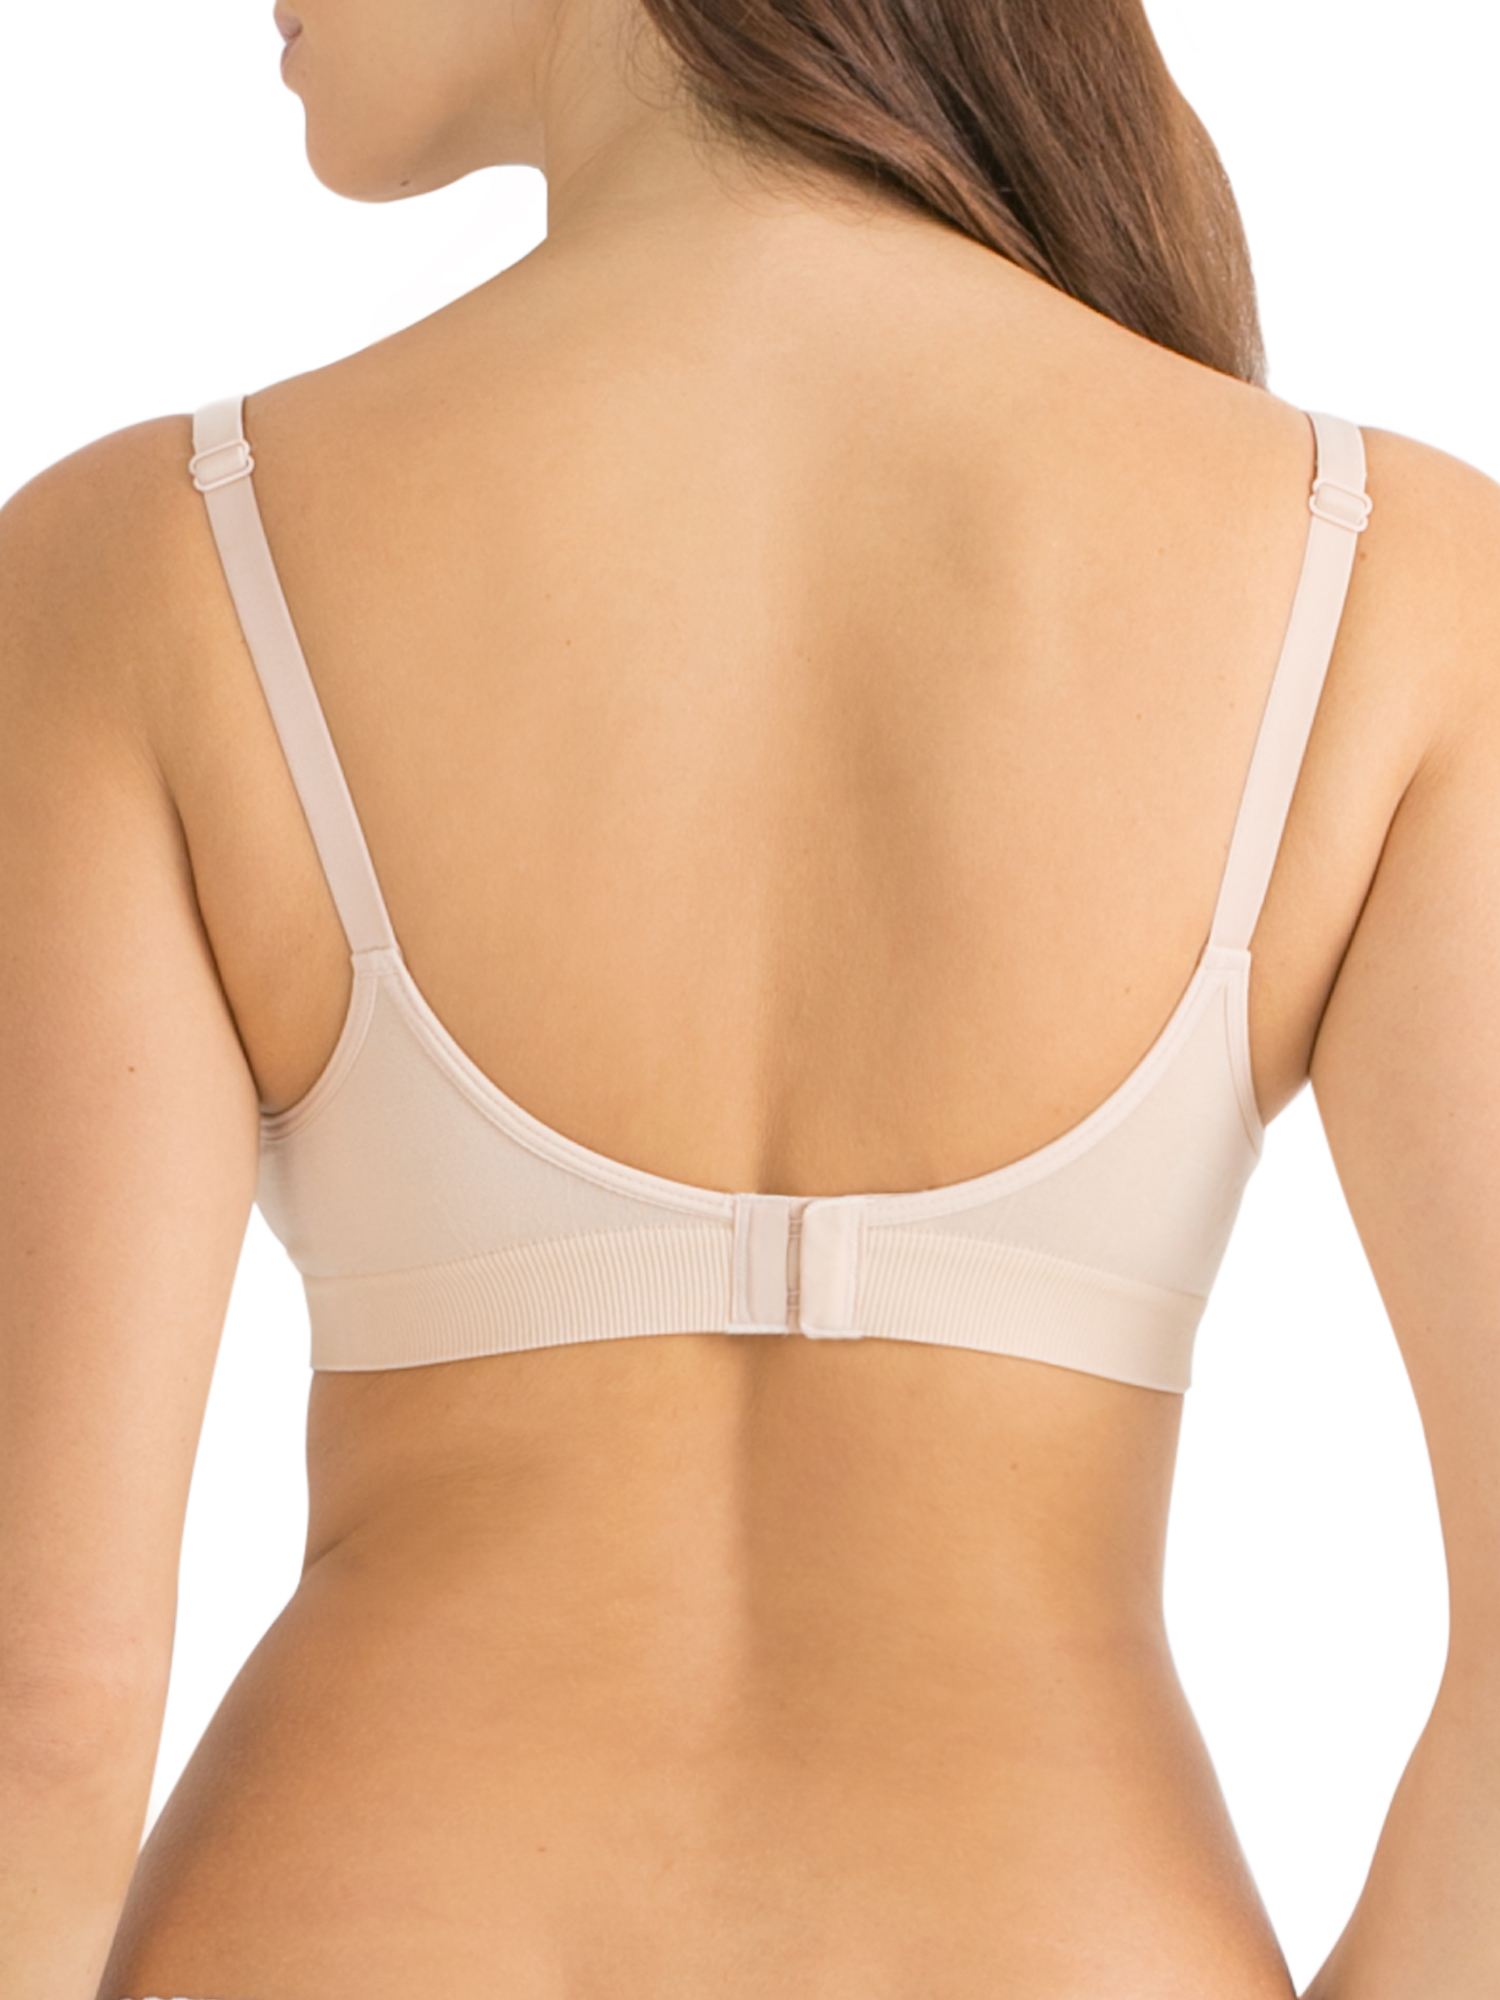 Fruit of the Loom Women's Seamless Wire Free Push Up with Lift Bra, Style FT640 - image 2 of 5